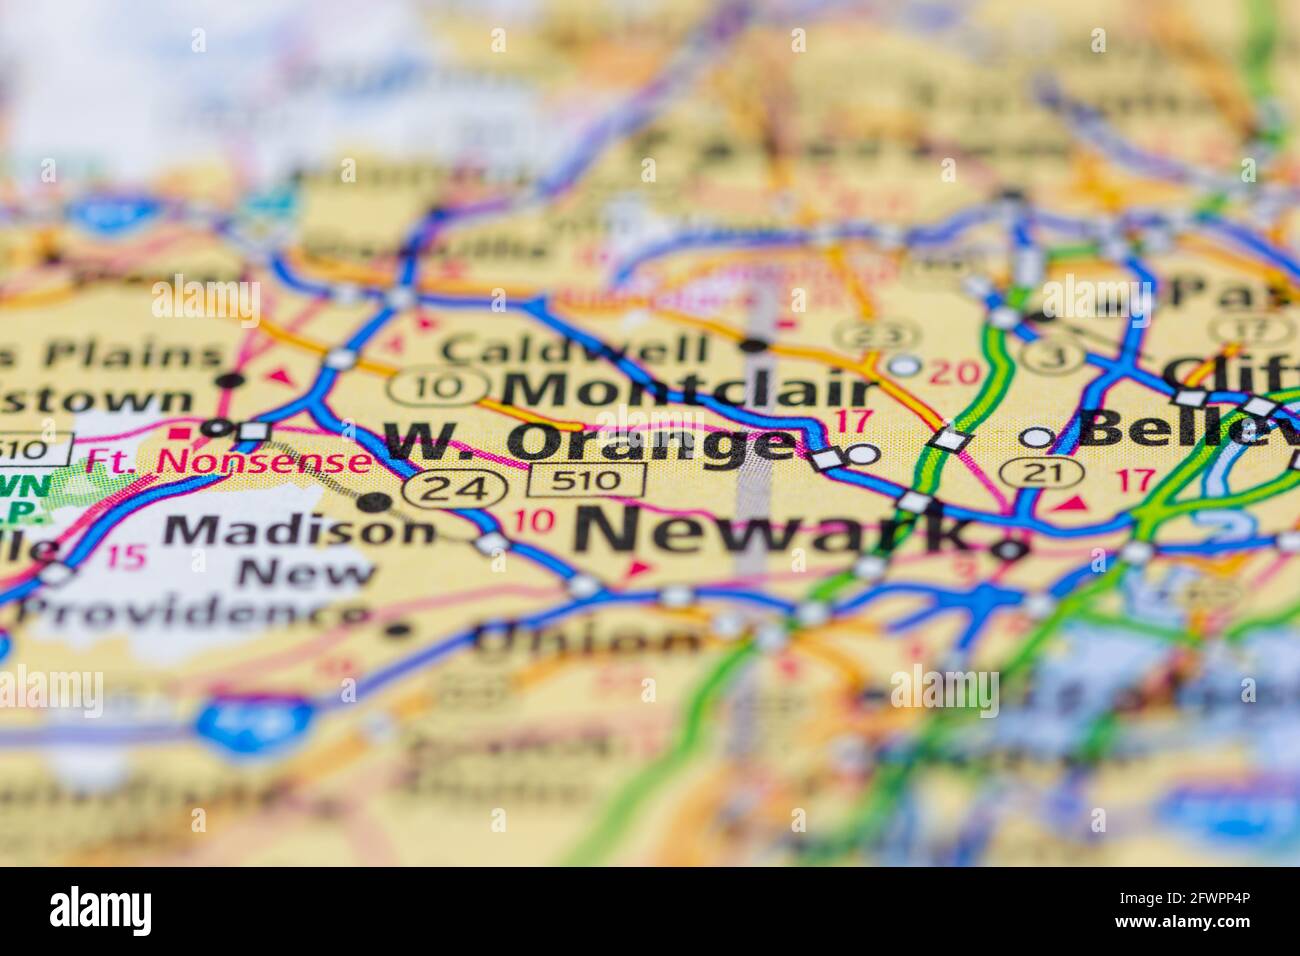 West orange New Jersey USA shown on a Geography map or road map Stock Photo